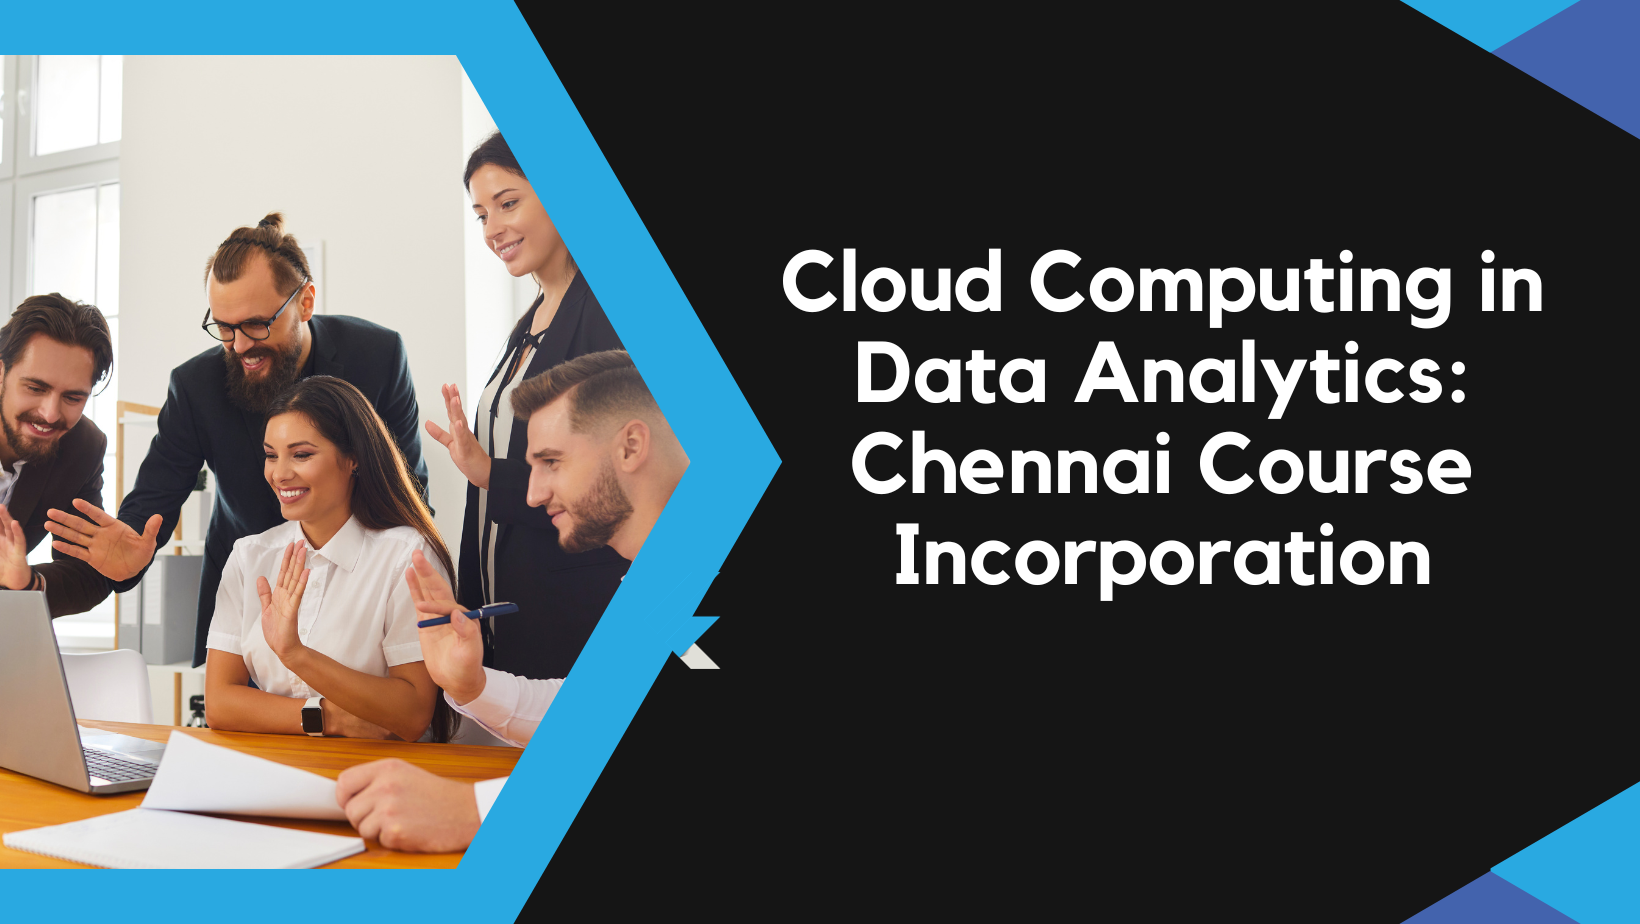 You are currently viewing Cloud Computing in Data Analytics: Chennai Course Incorporation